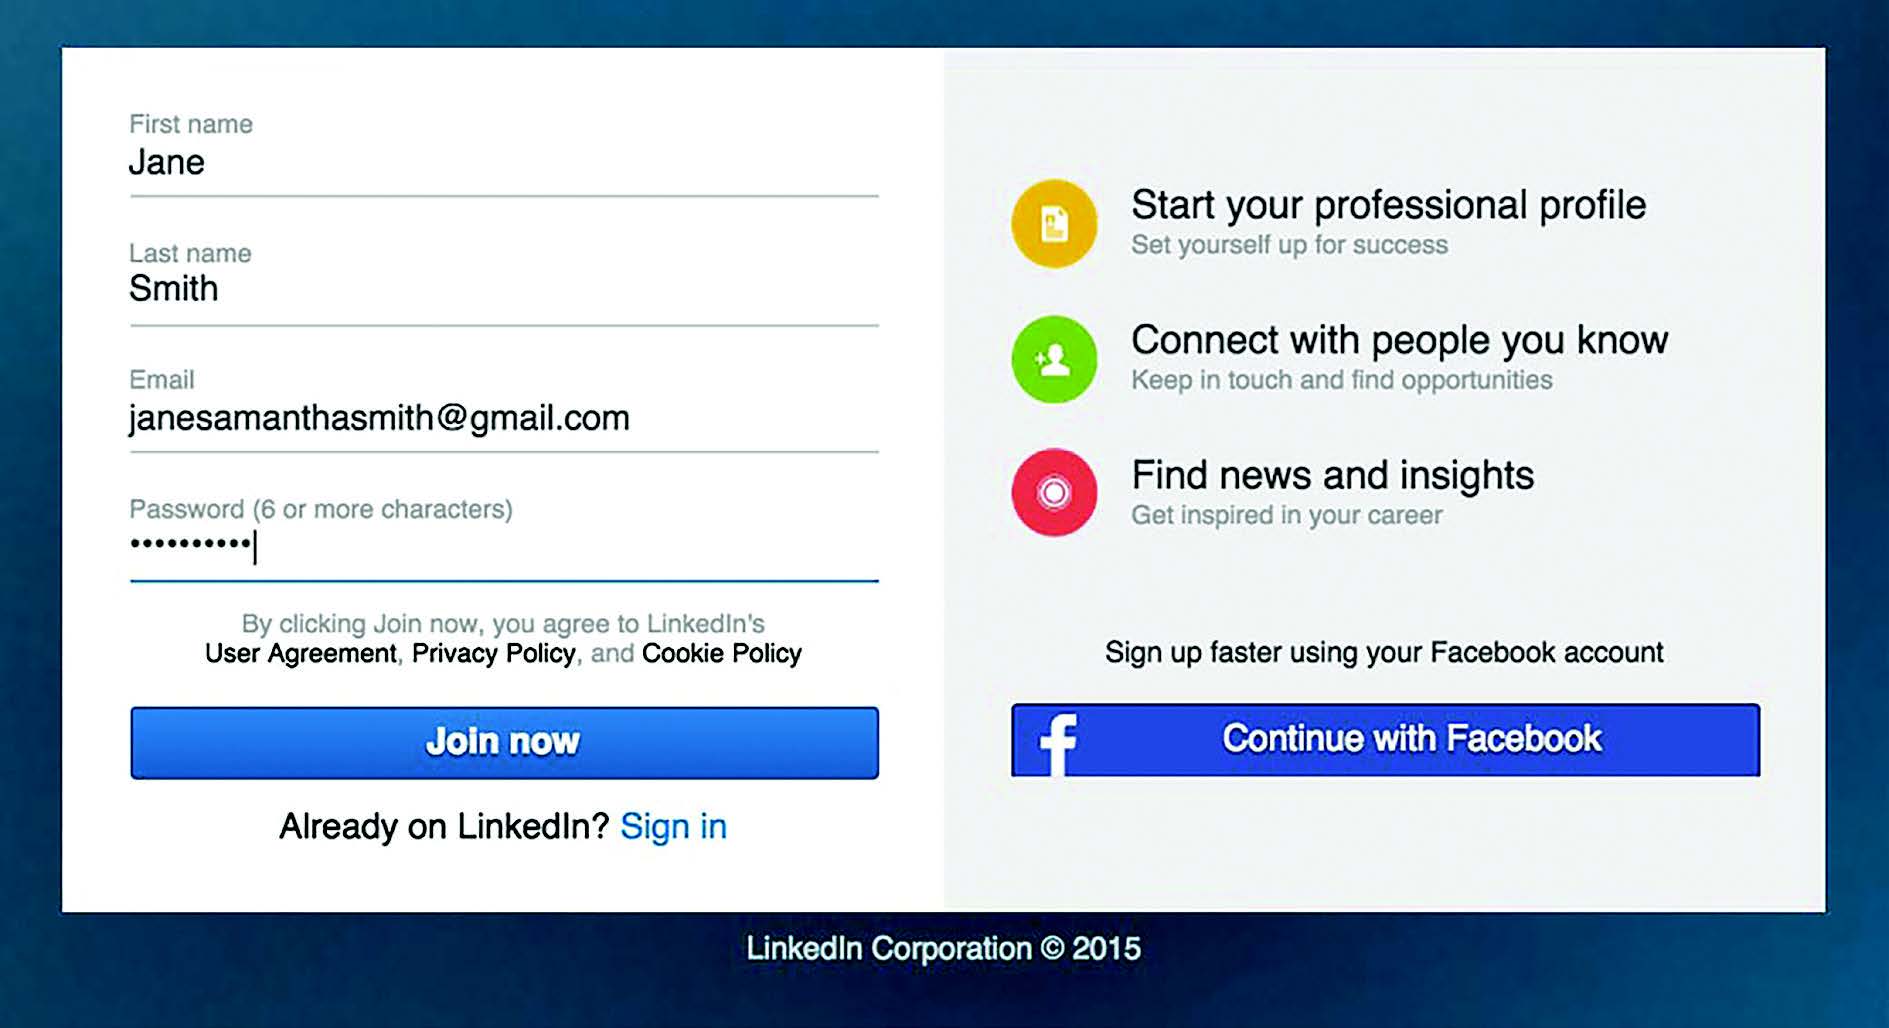 A Trustee's guide to LinkedIN 6